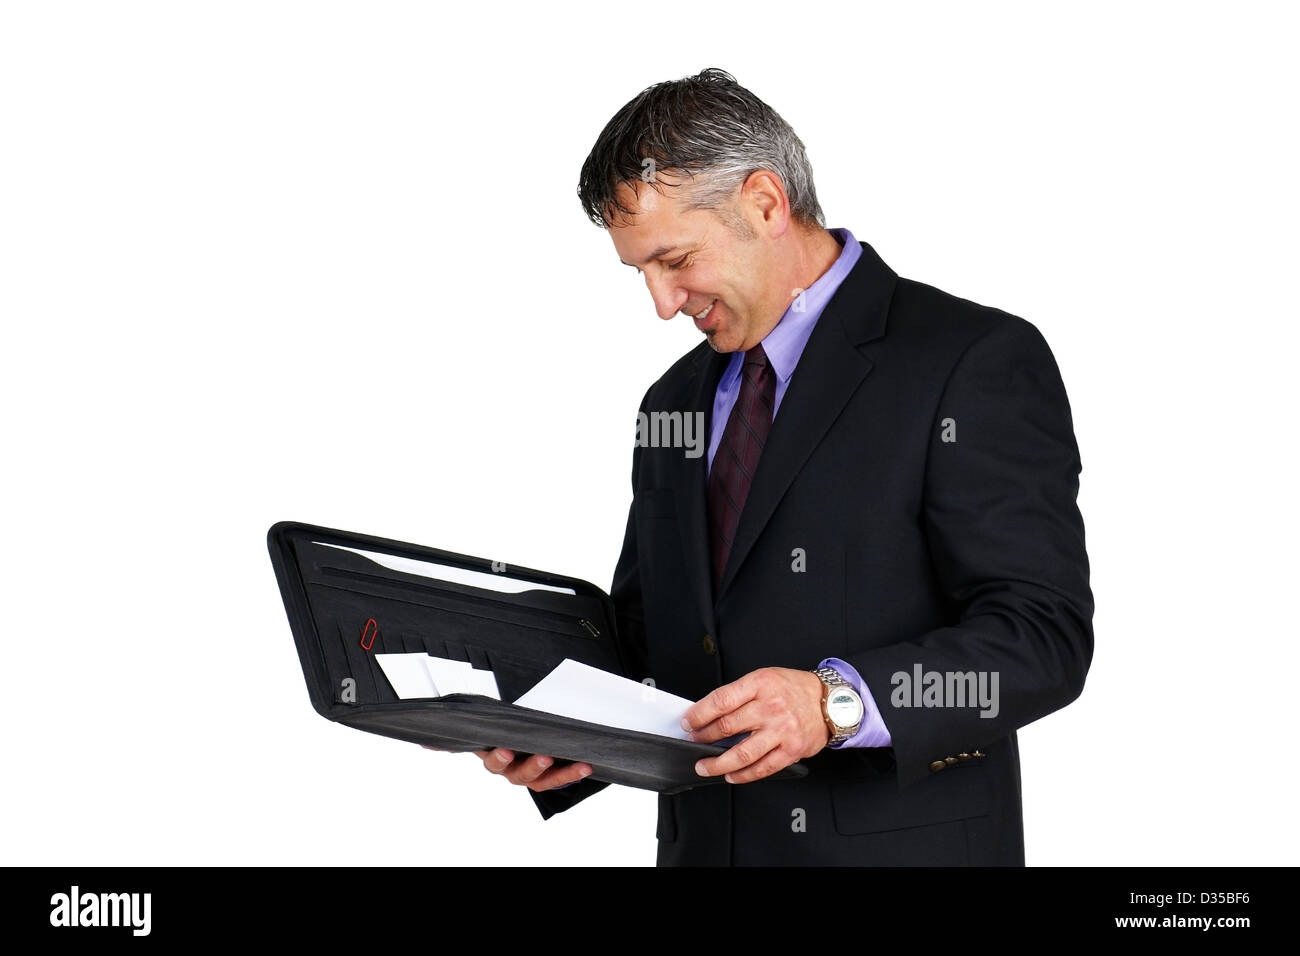 Man in suit and tie, holding paperwork looking at it and smiling, can be boss or management employee. Stock Photo